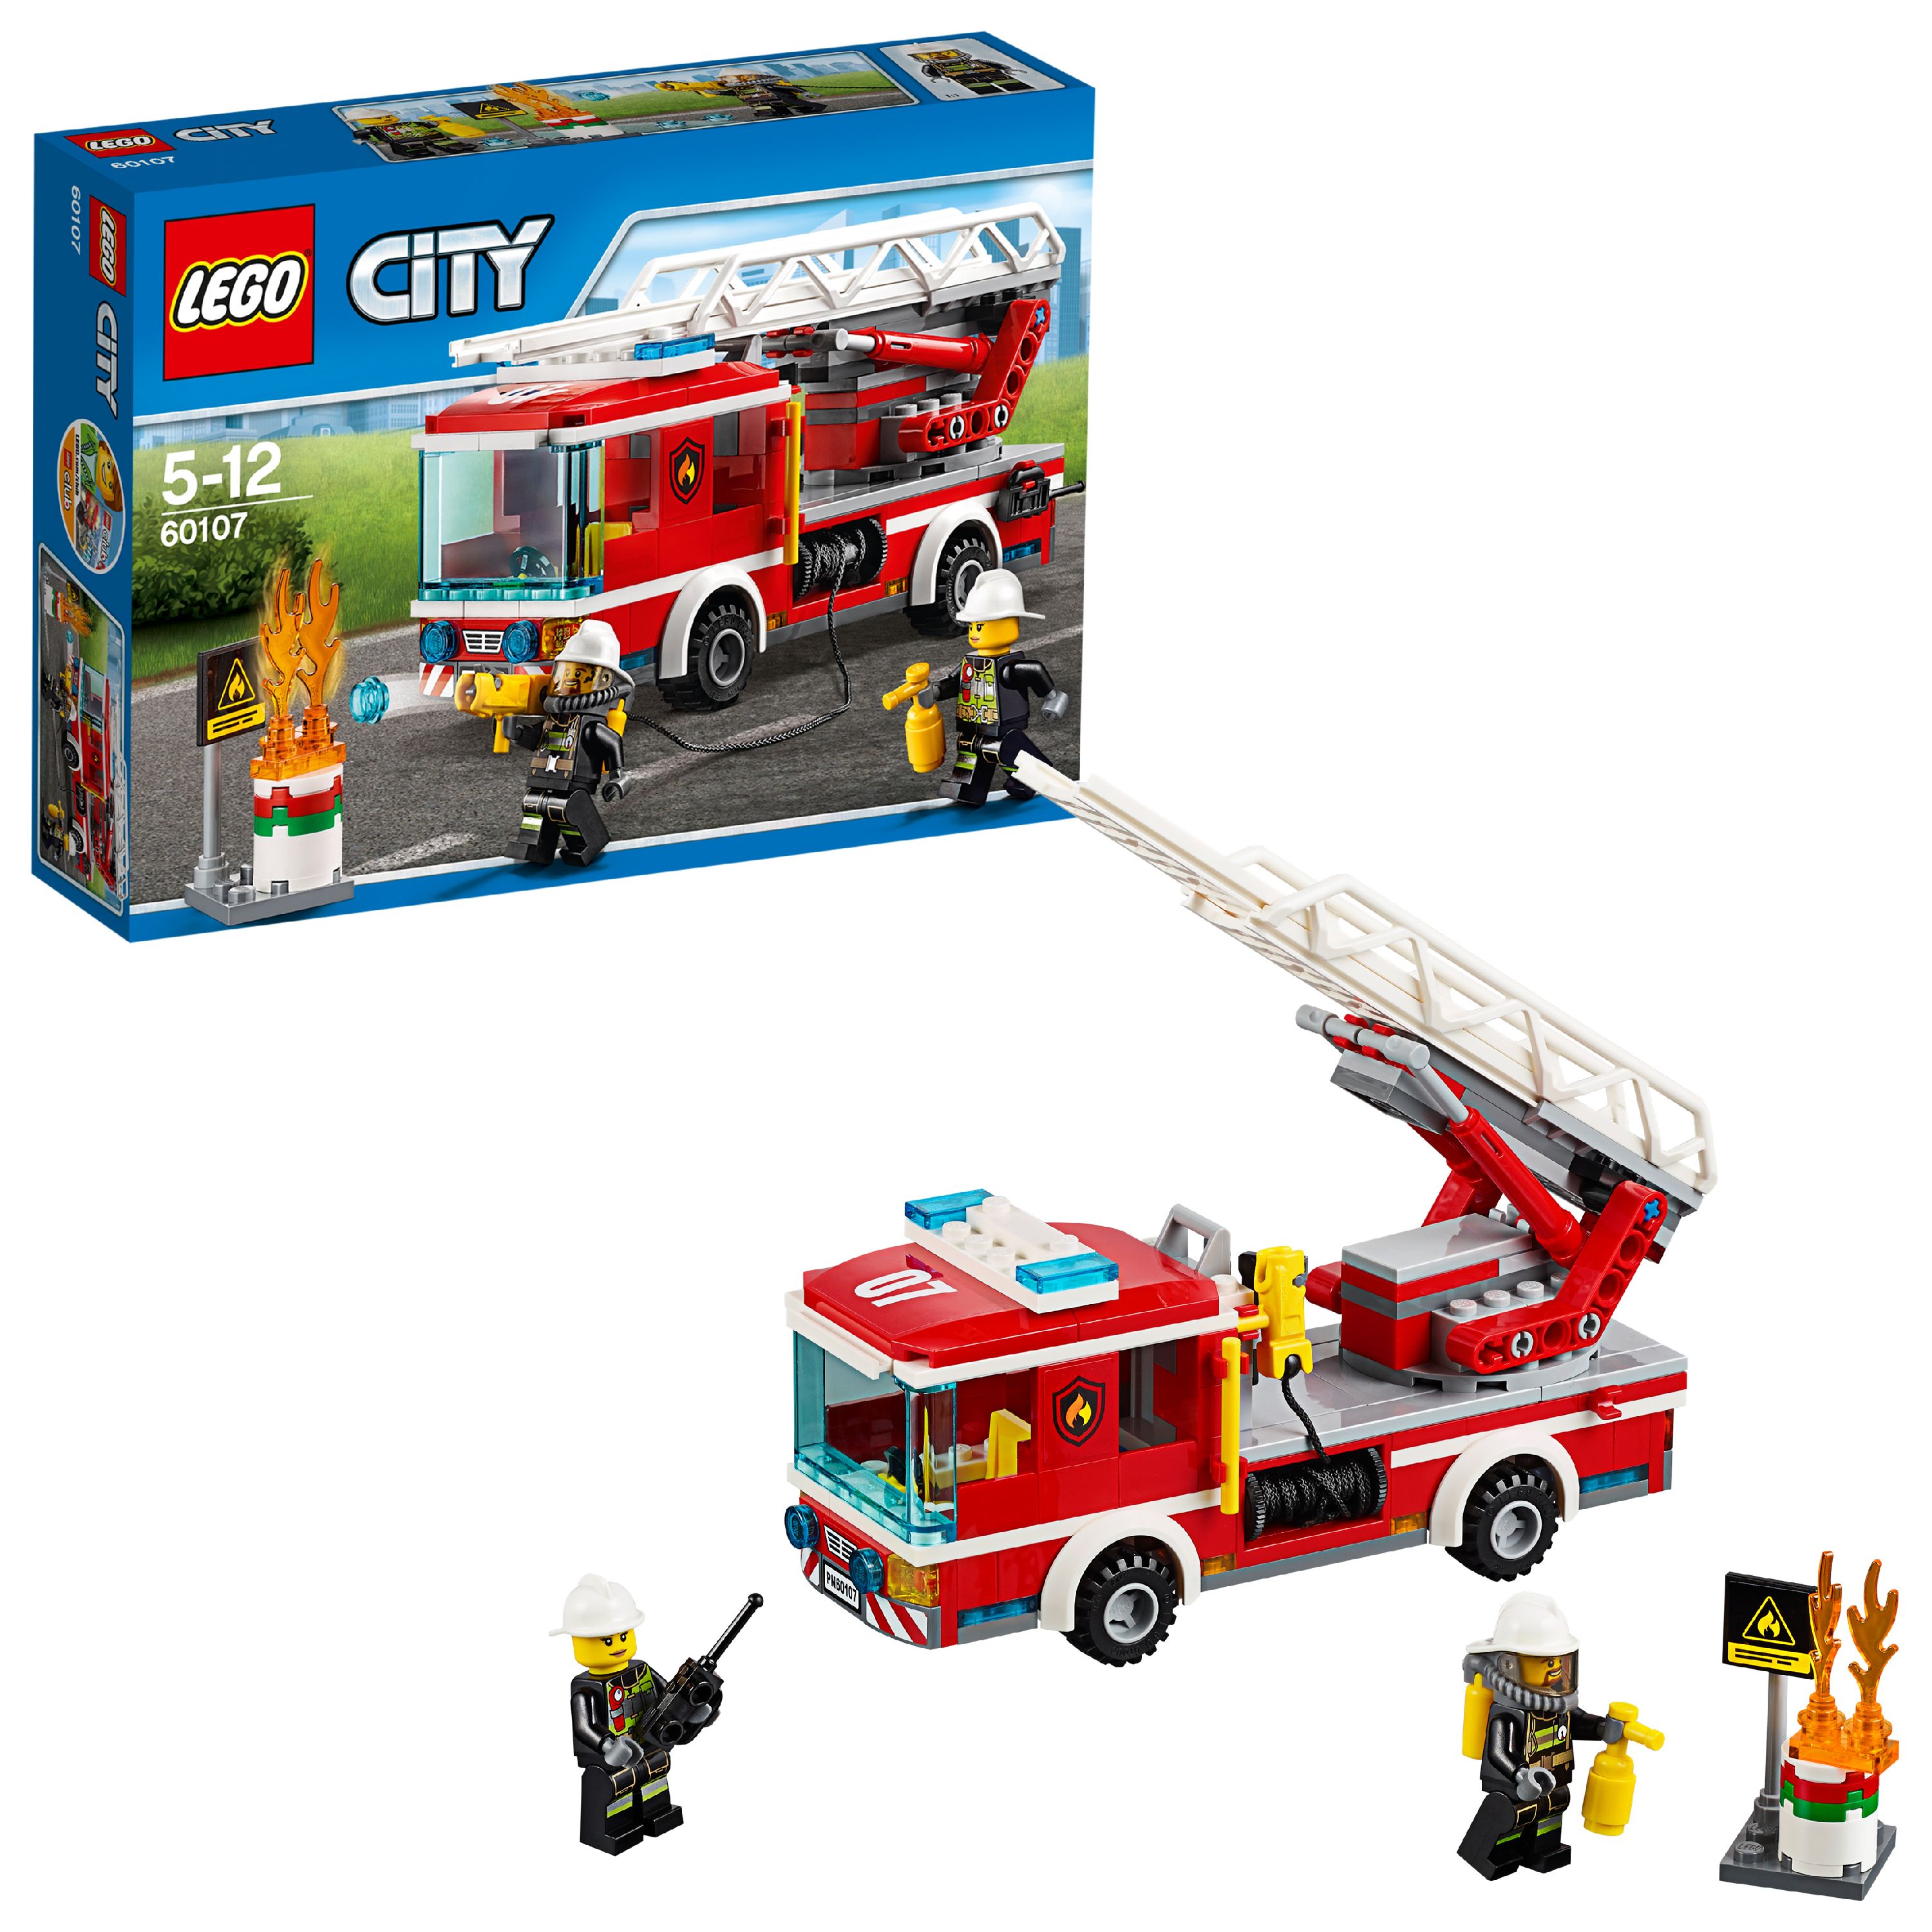 LEGO City Fire Fire Ladder Truck 60107 - image 1 of 4